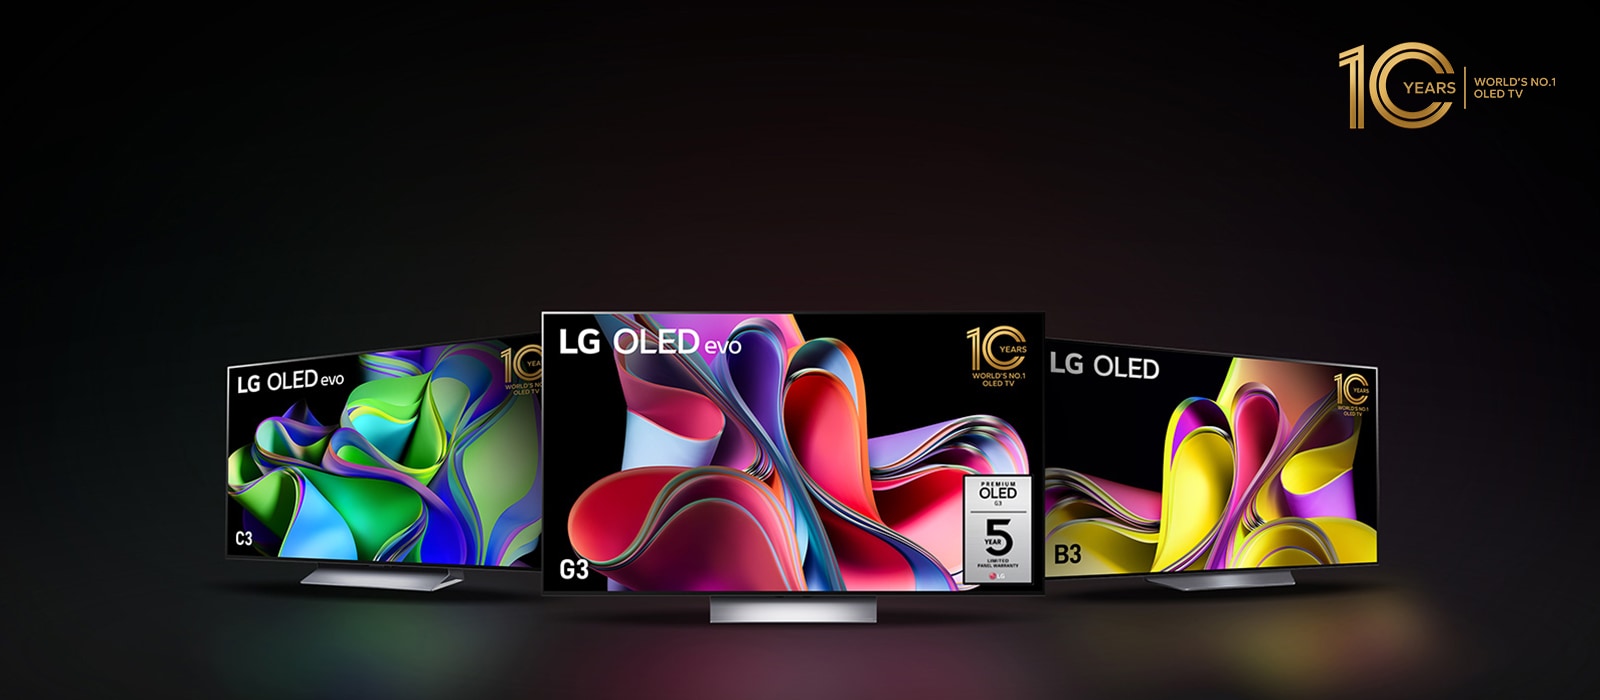 See which LG OLED TV is right for you